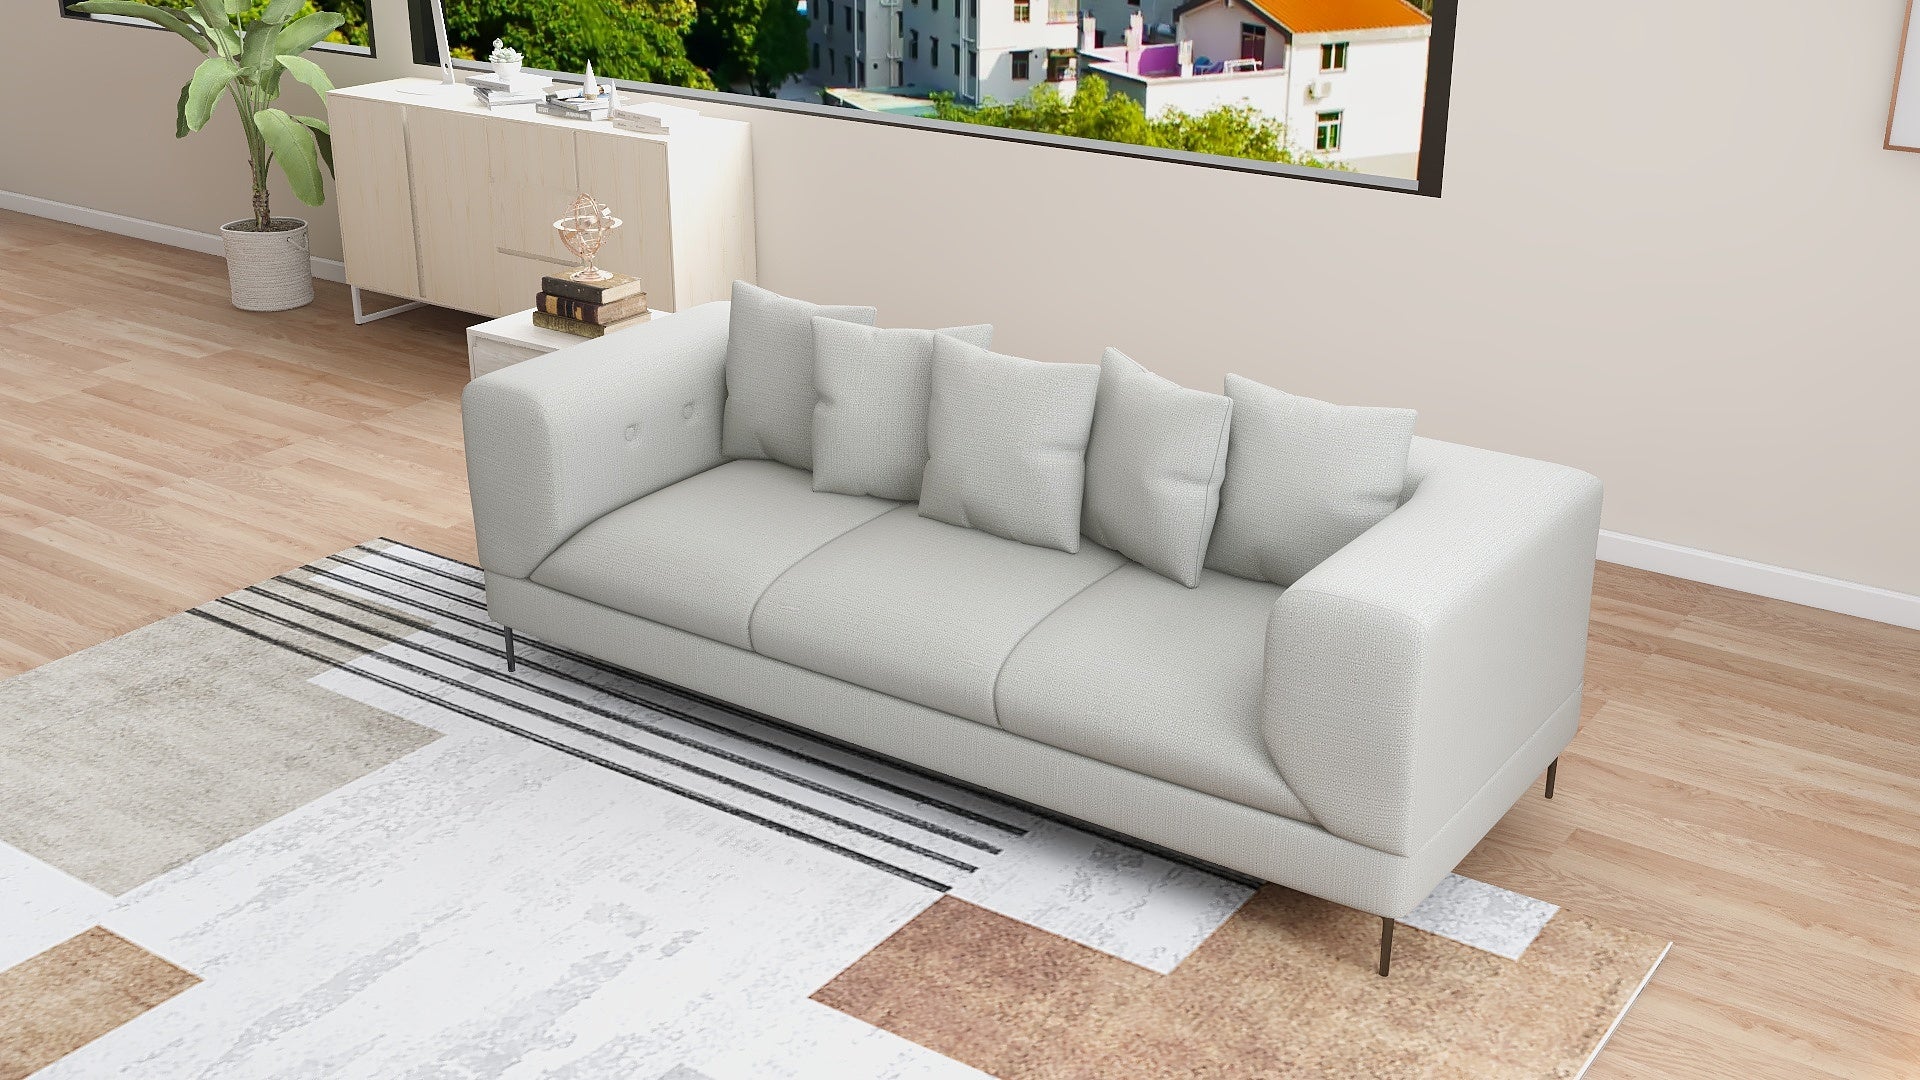 HELEN 3-Seater Fabric Sofa AF Home